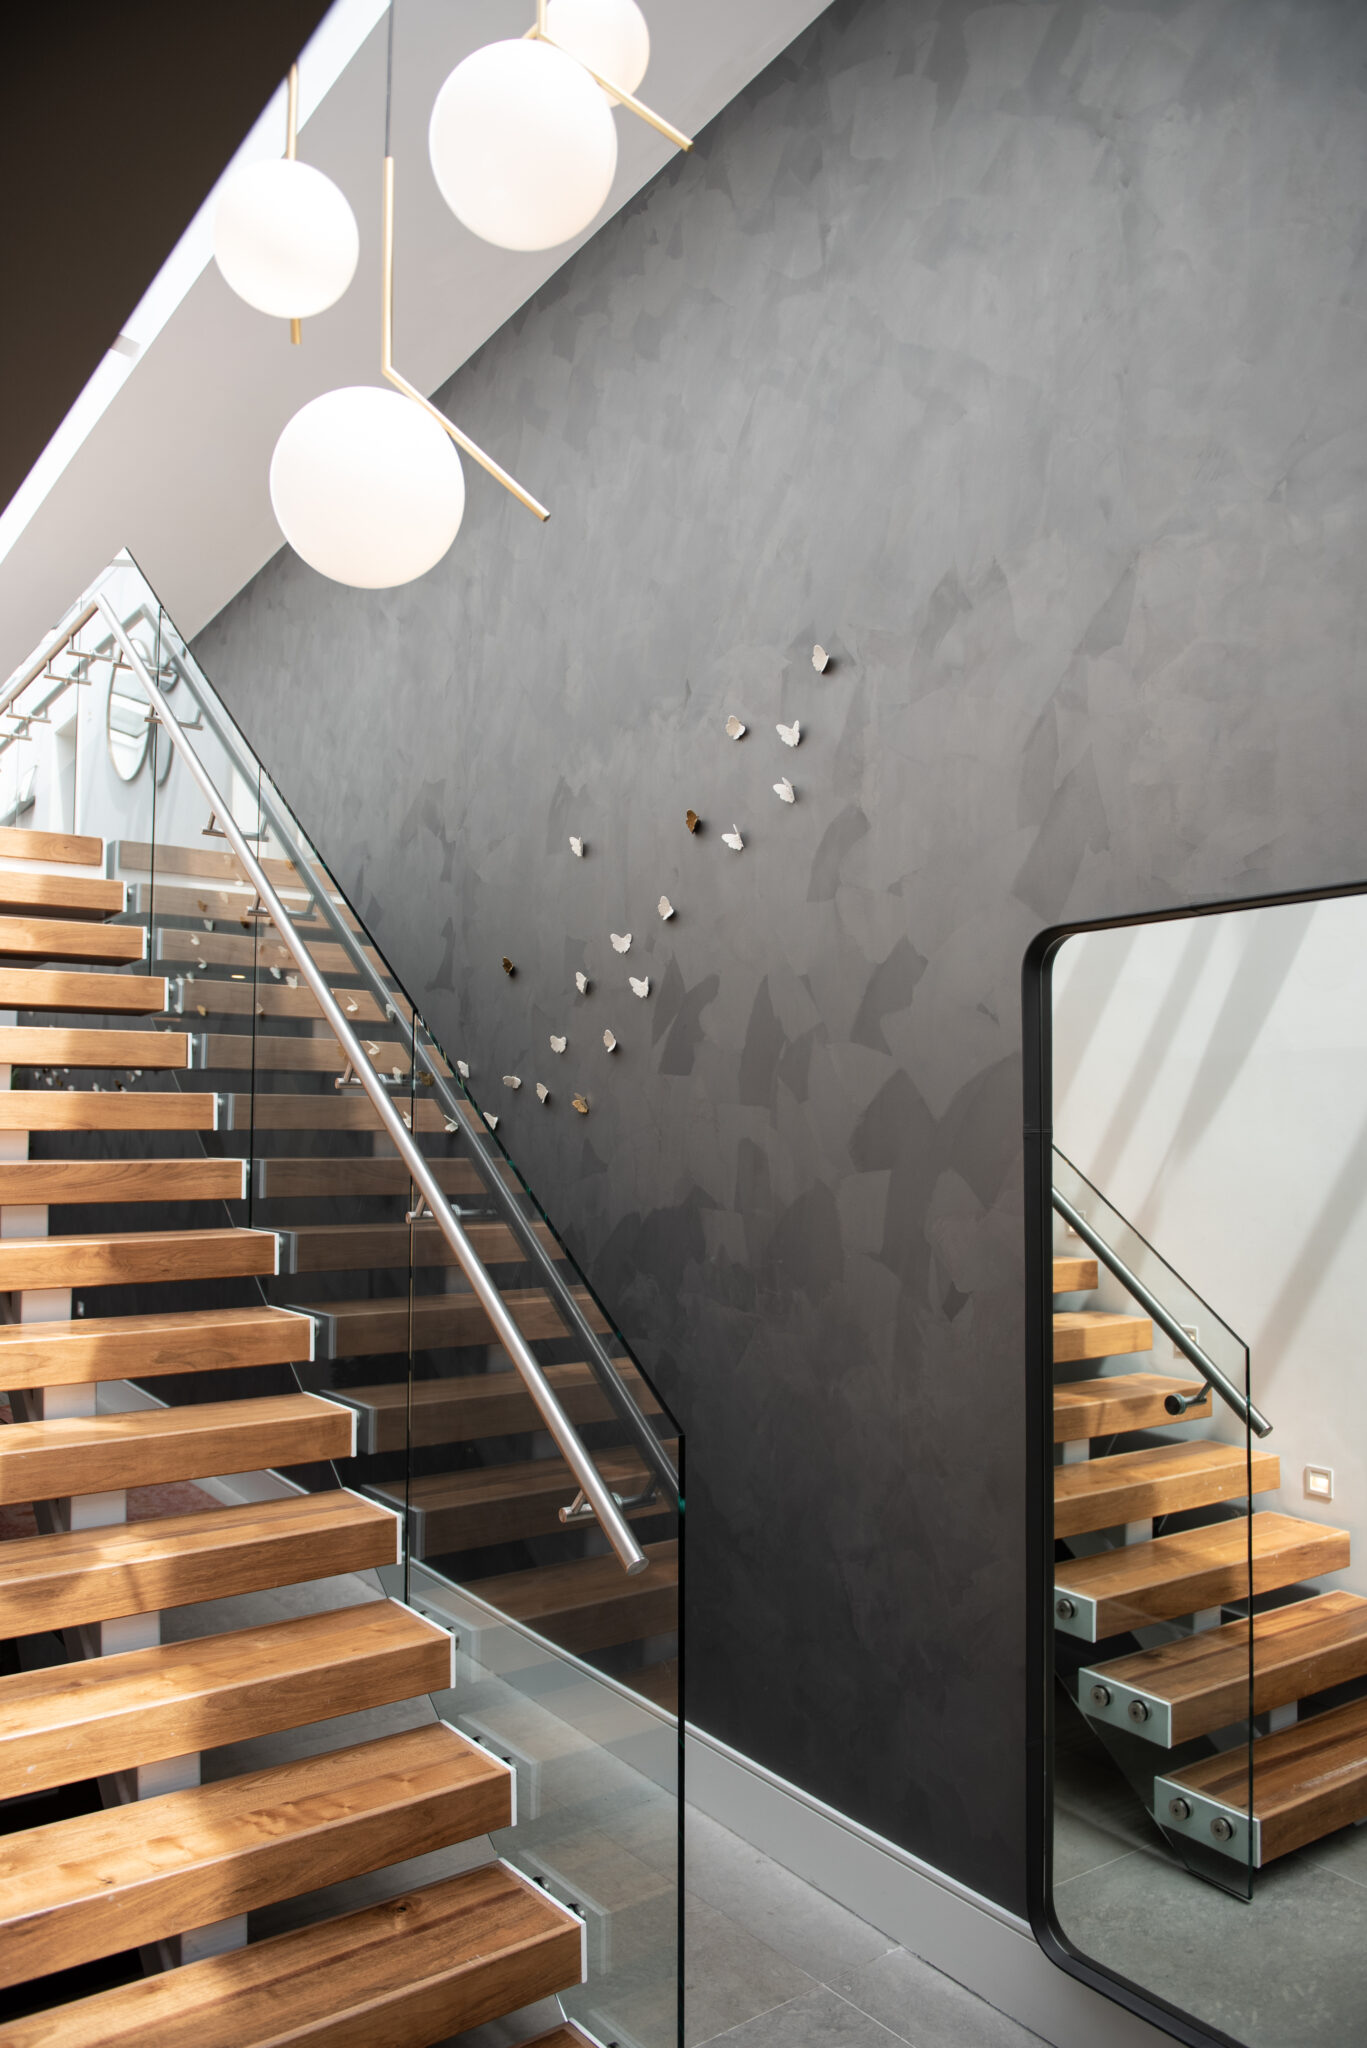 image showing a modern staircase and butterfly ceramic wall sculptures